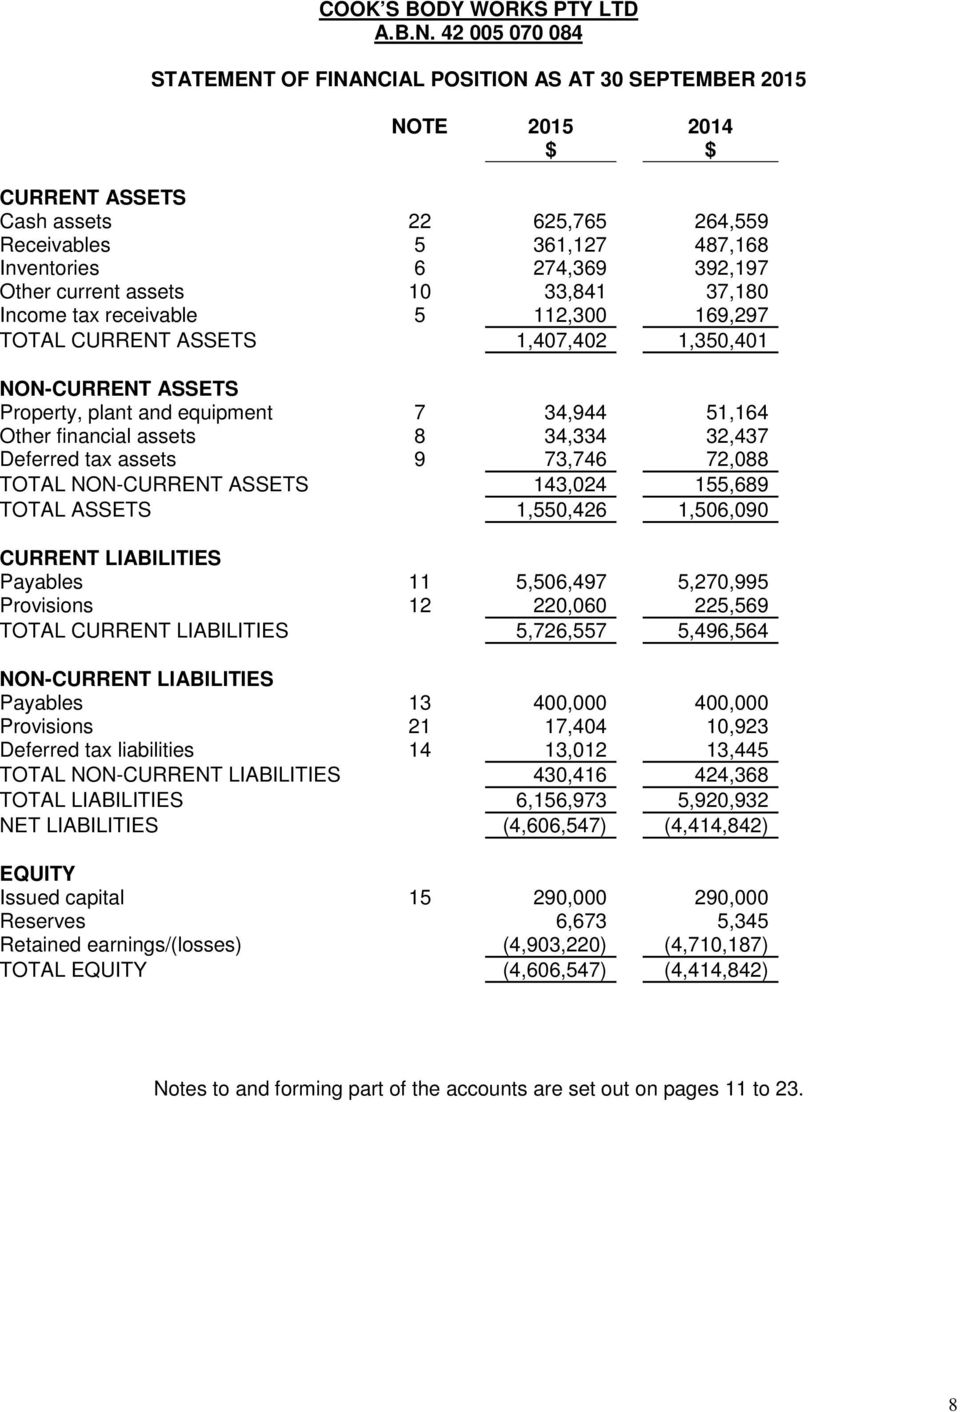 34,334 32,437 Deferred tax assets 9 73,746 72,088 TOTAL NON-CURRENT ASSETS 143,024 155,689 TOTAL ASSETS 1,550,426 1,506,090 CURRENT LIABILITIES Payables 11 5,506,497 5,270,995 Provisions 12 220,060